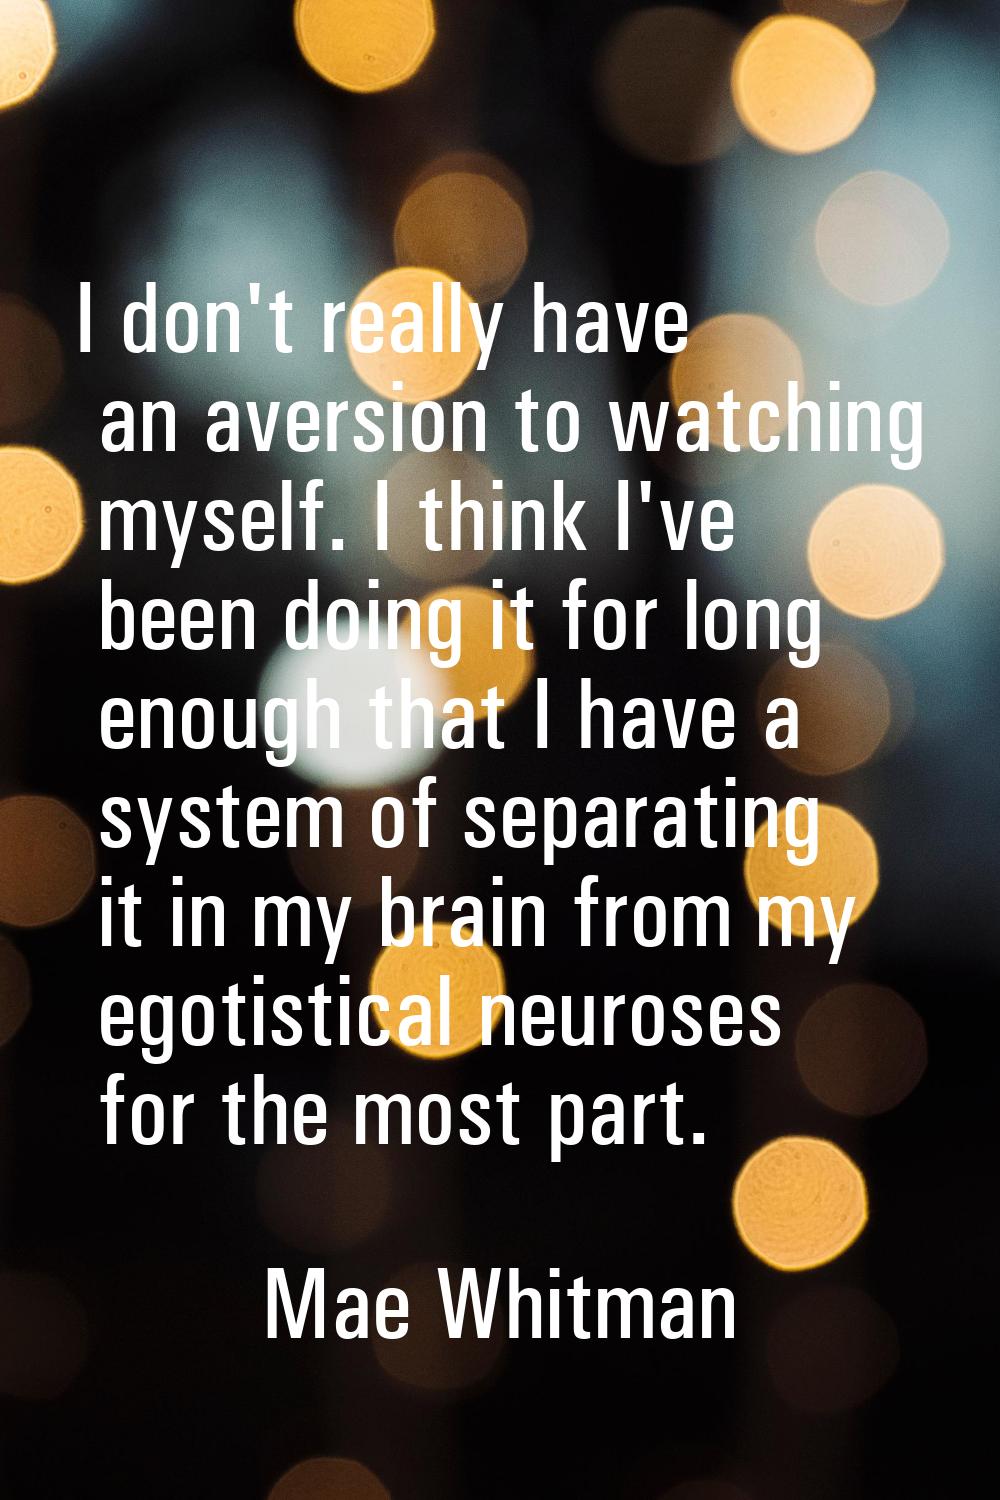 I don't really have an aversion to watching myself. I think I've been doing it for long enough that